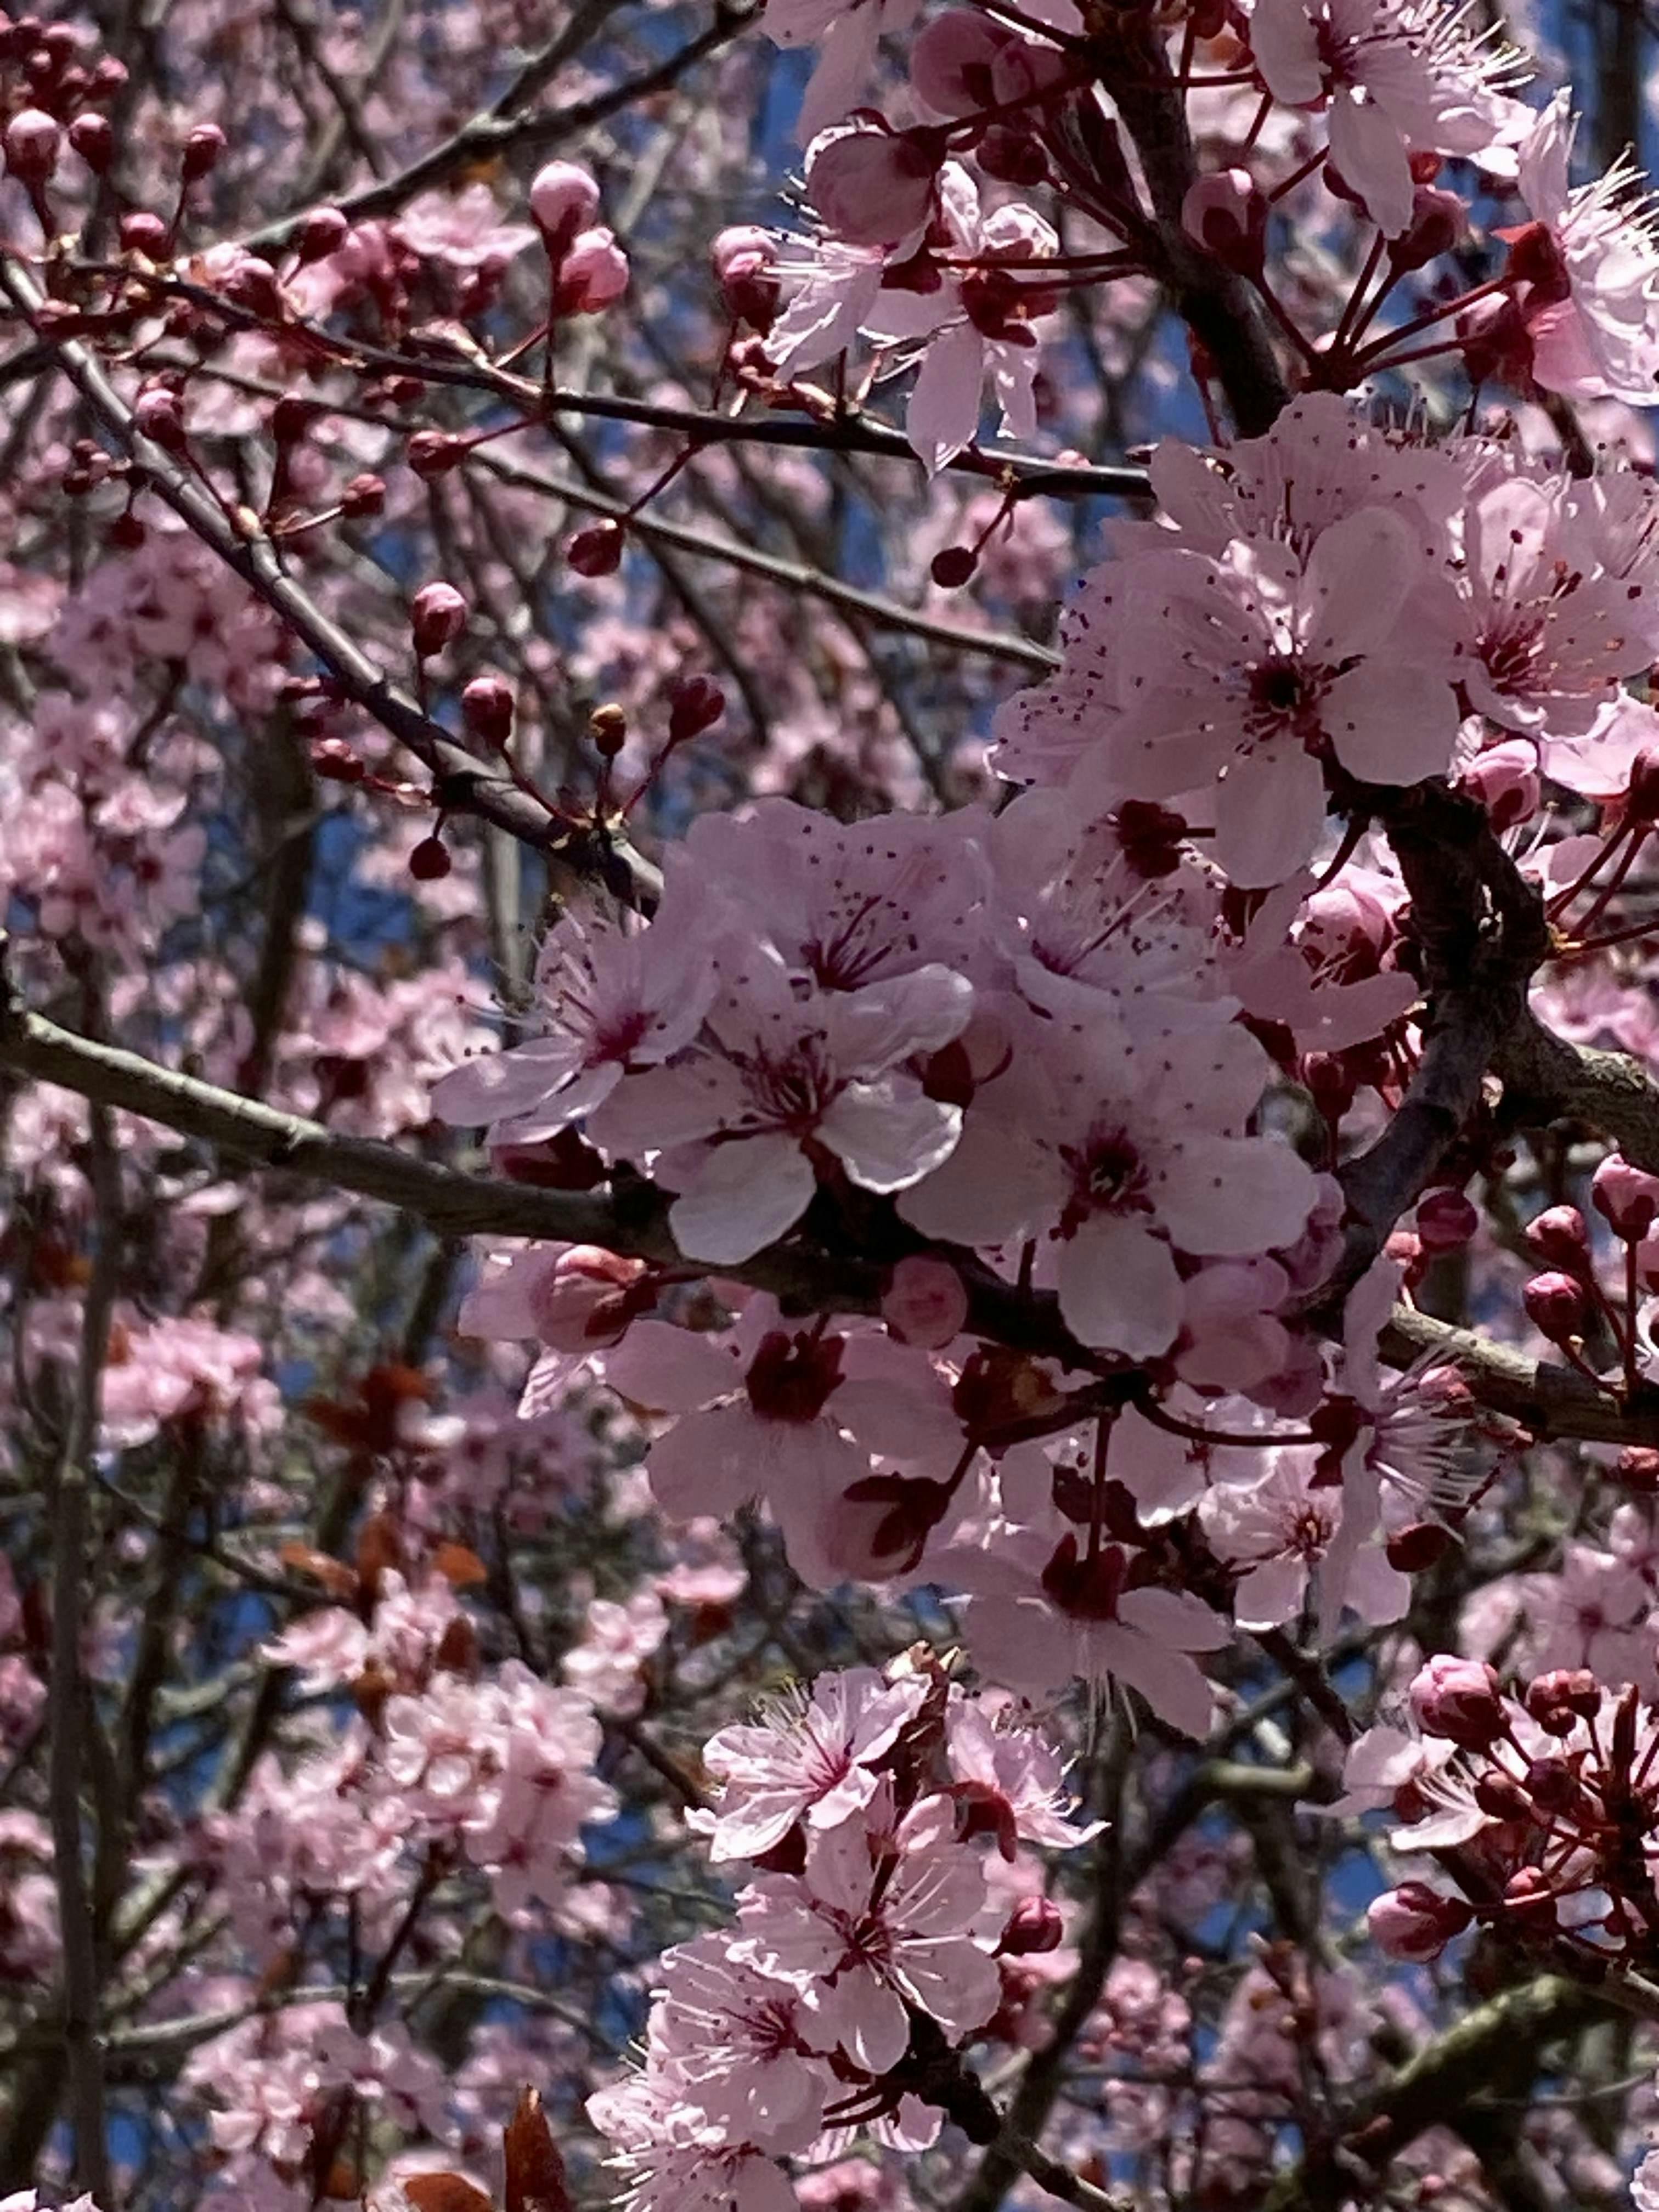 Let's Keep Our Sakura Trees Blossoming